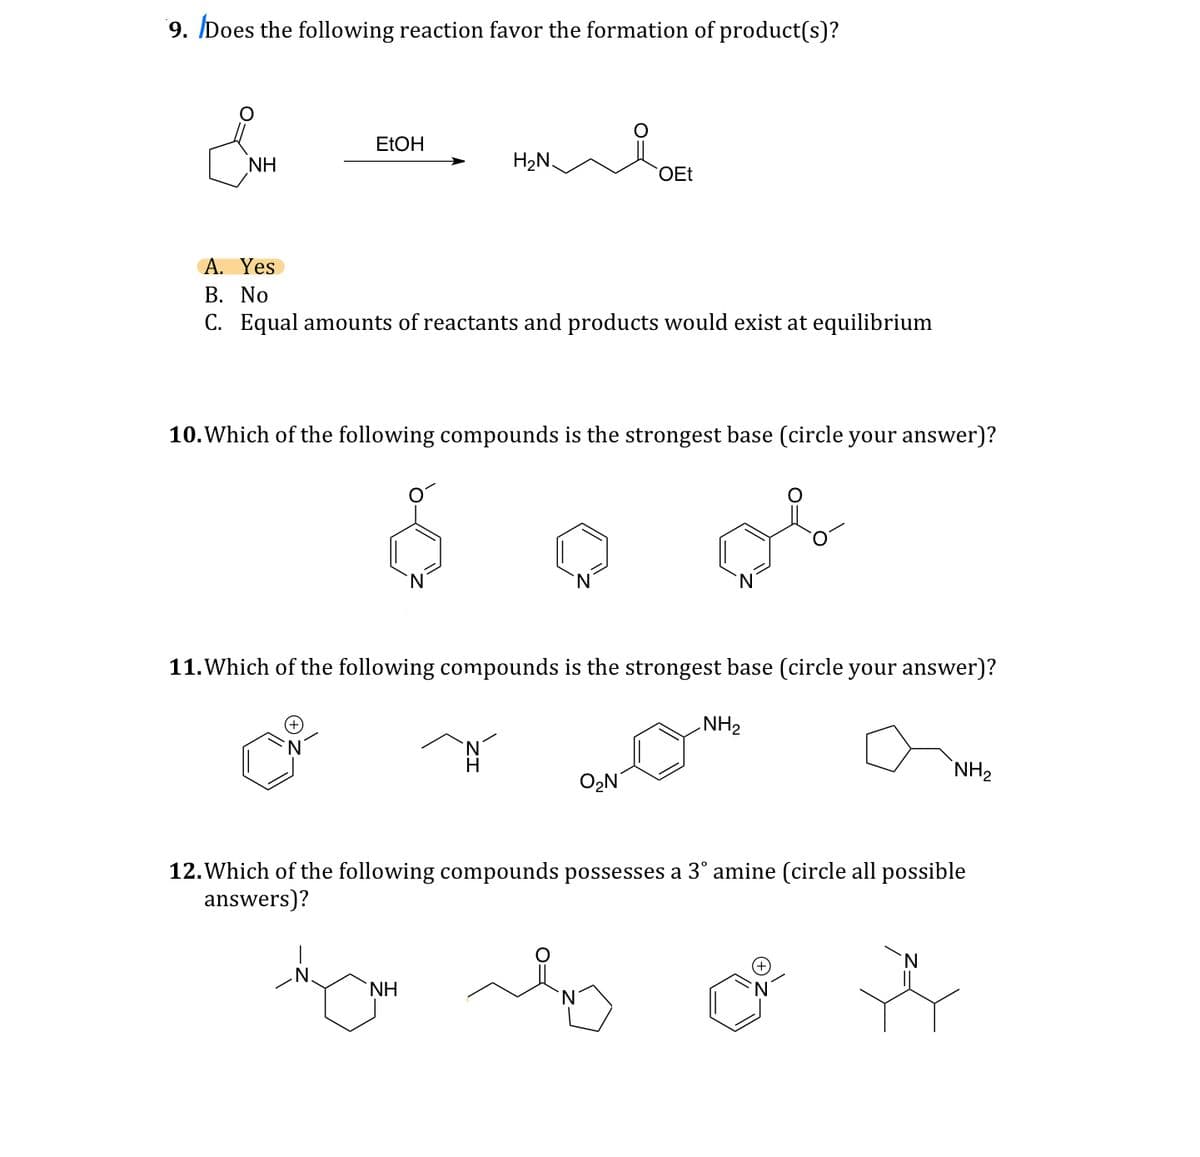 9. Does the following reaction favor the formation of product(s)?
EtOH
NH
H₂N
OEt
A. Yes
B. No
C. Equal amounts of reactants and products would exist at equilibrium
10. Which of the following compounds is the strongest base (circle your answer)?
11. Which of the following compounds is the strongest base (circle your answer)?
NH2
H
O₂N
NH2
12. Which of the following compounds possesses a 3° amine (circle all possible
answers)?
NH
N